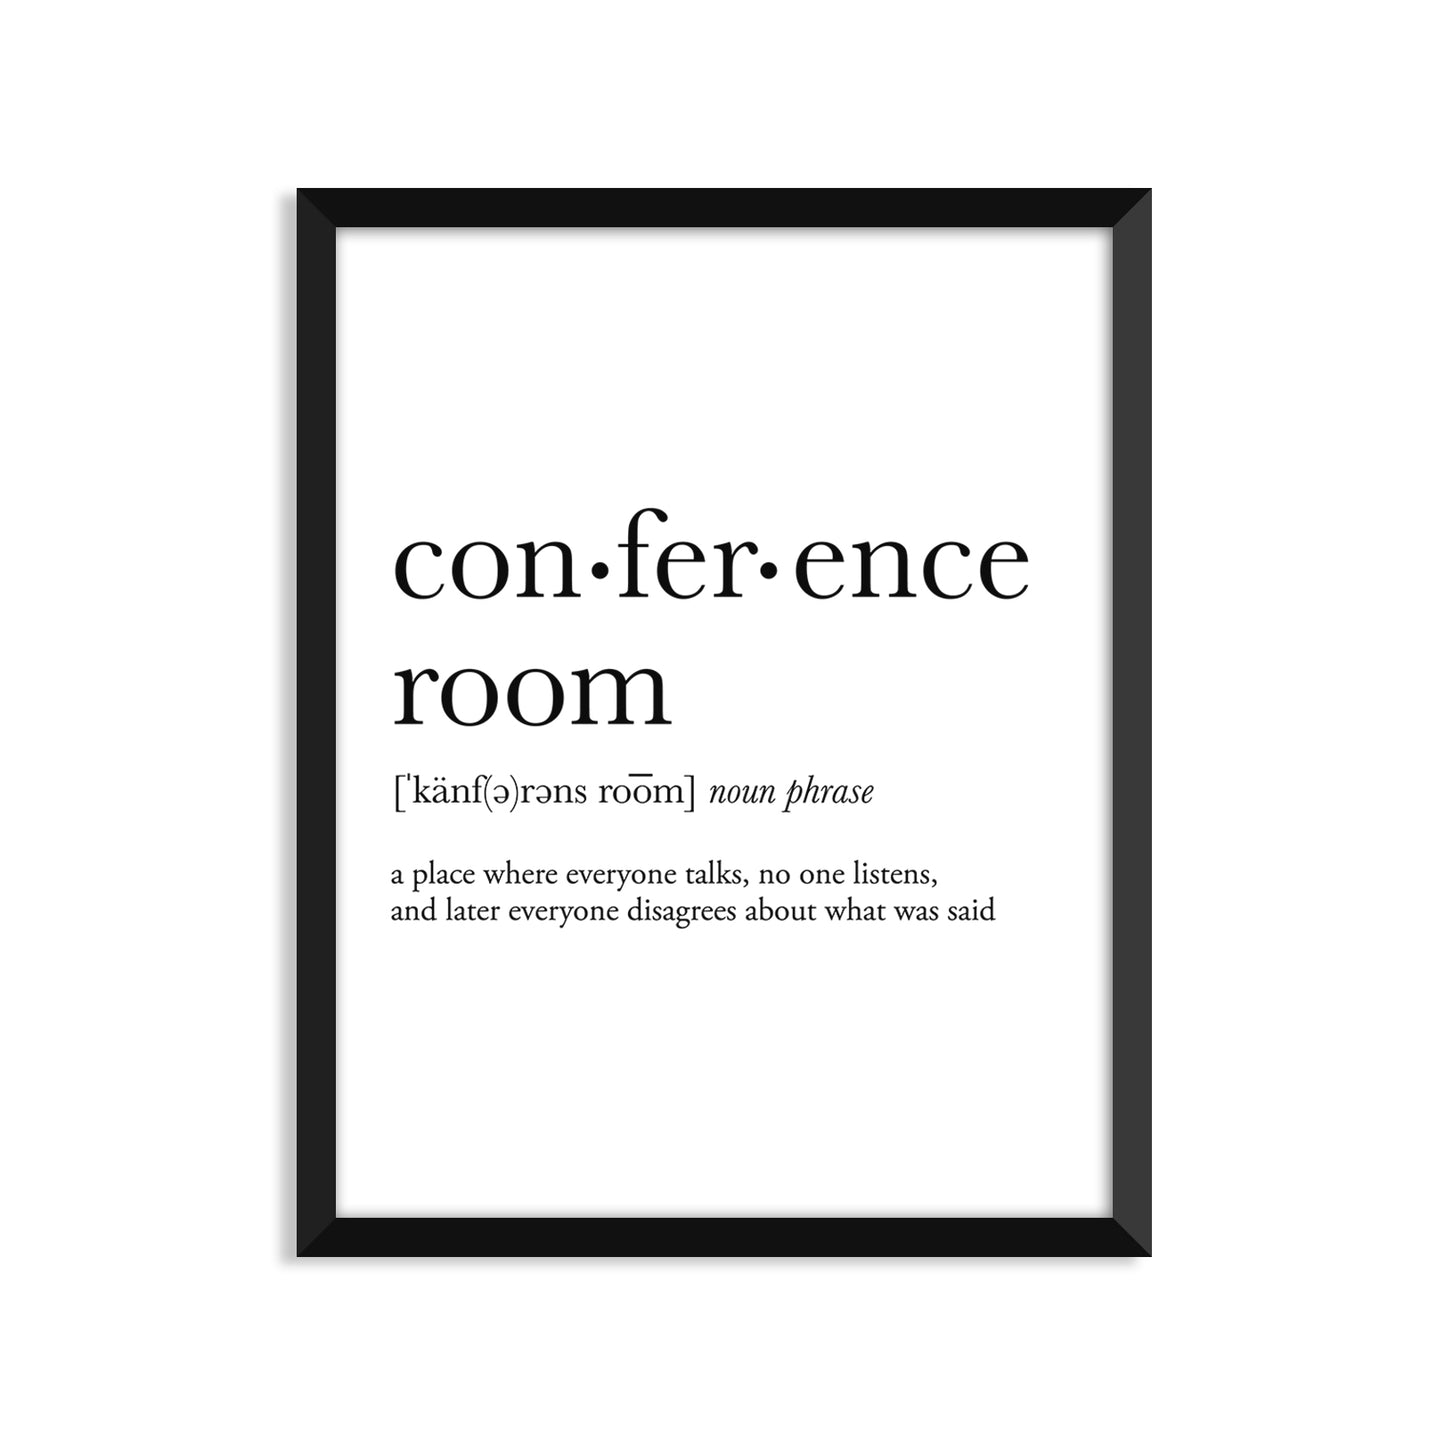 Conference Room Definition - Unframed Art Print Or Greeting Card